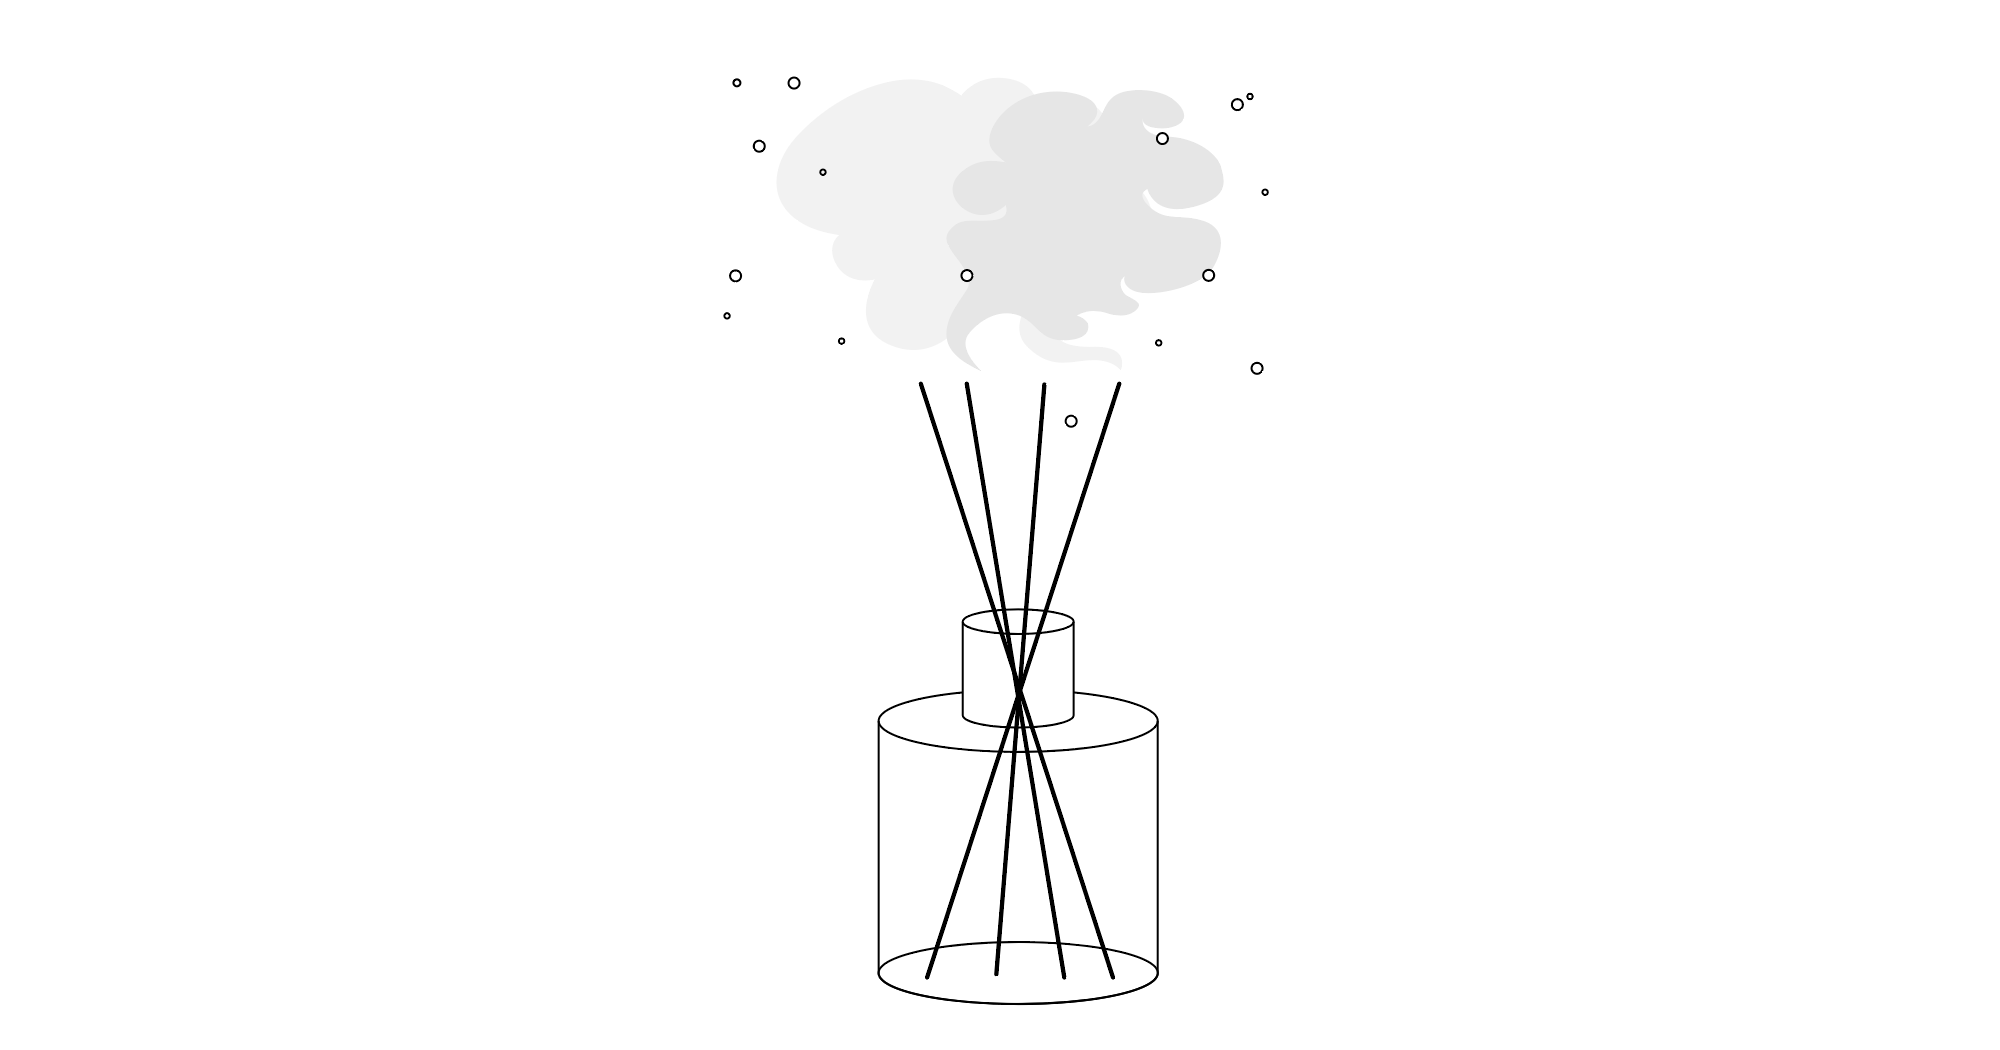 A drawing of burning incense